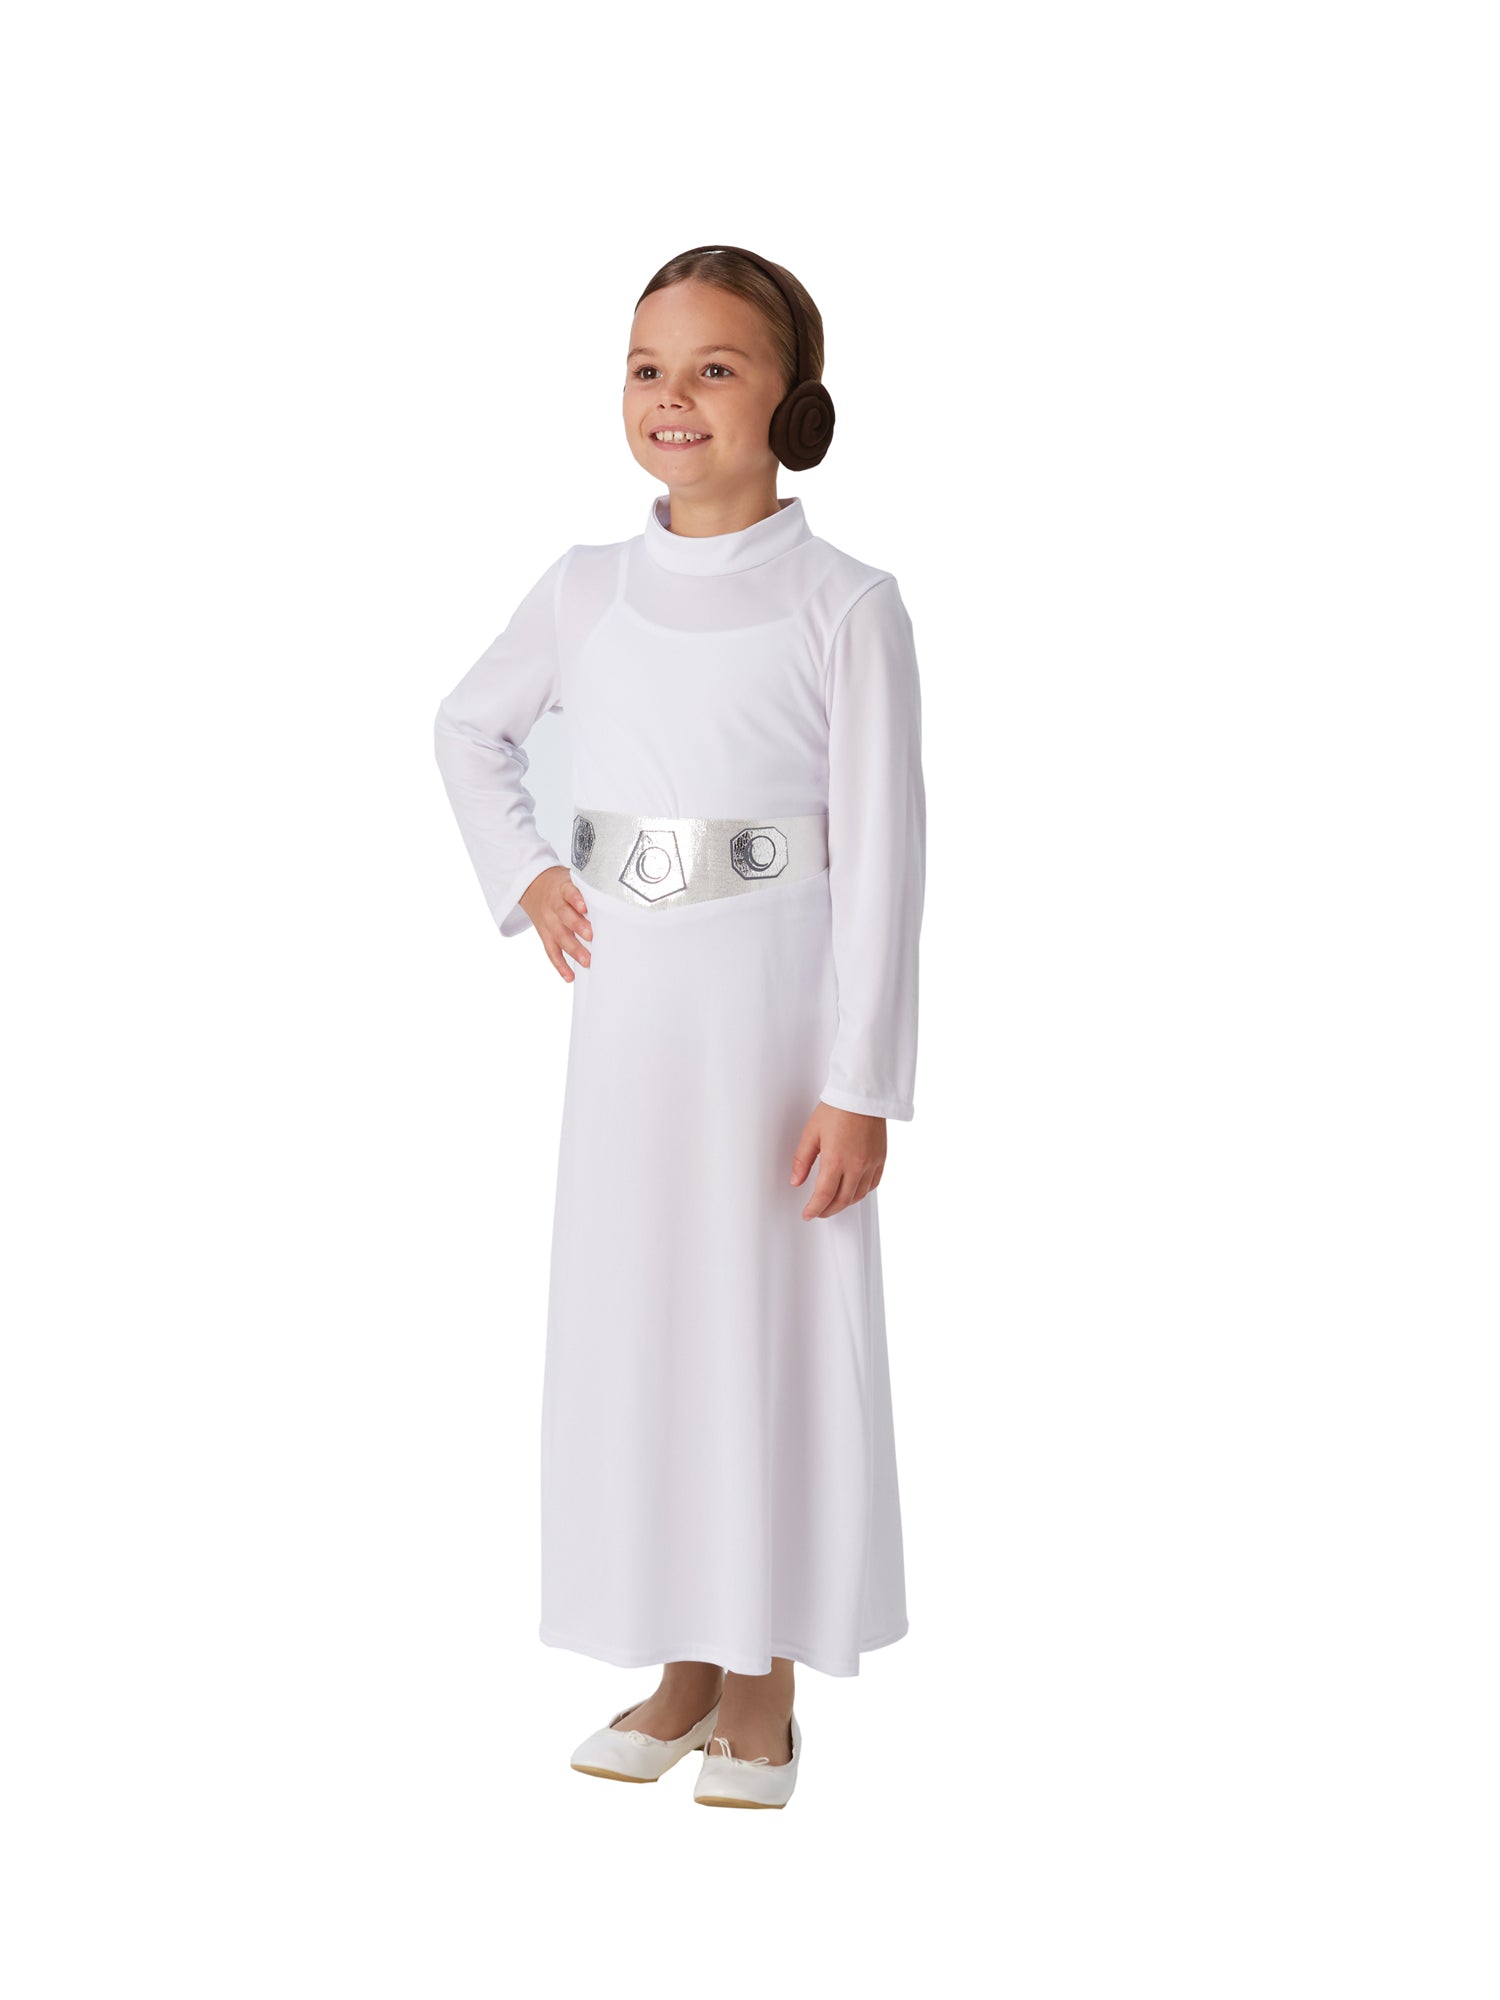 Princess Leia, A New Hope, A New Hope, A New Hope, Multi, Star Wars, Kids Costumes, Extra Large, Back